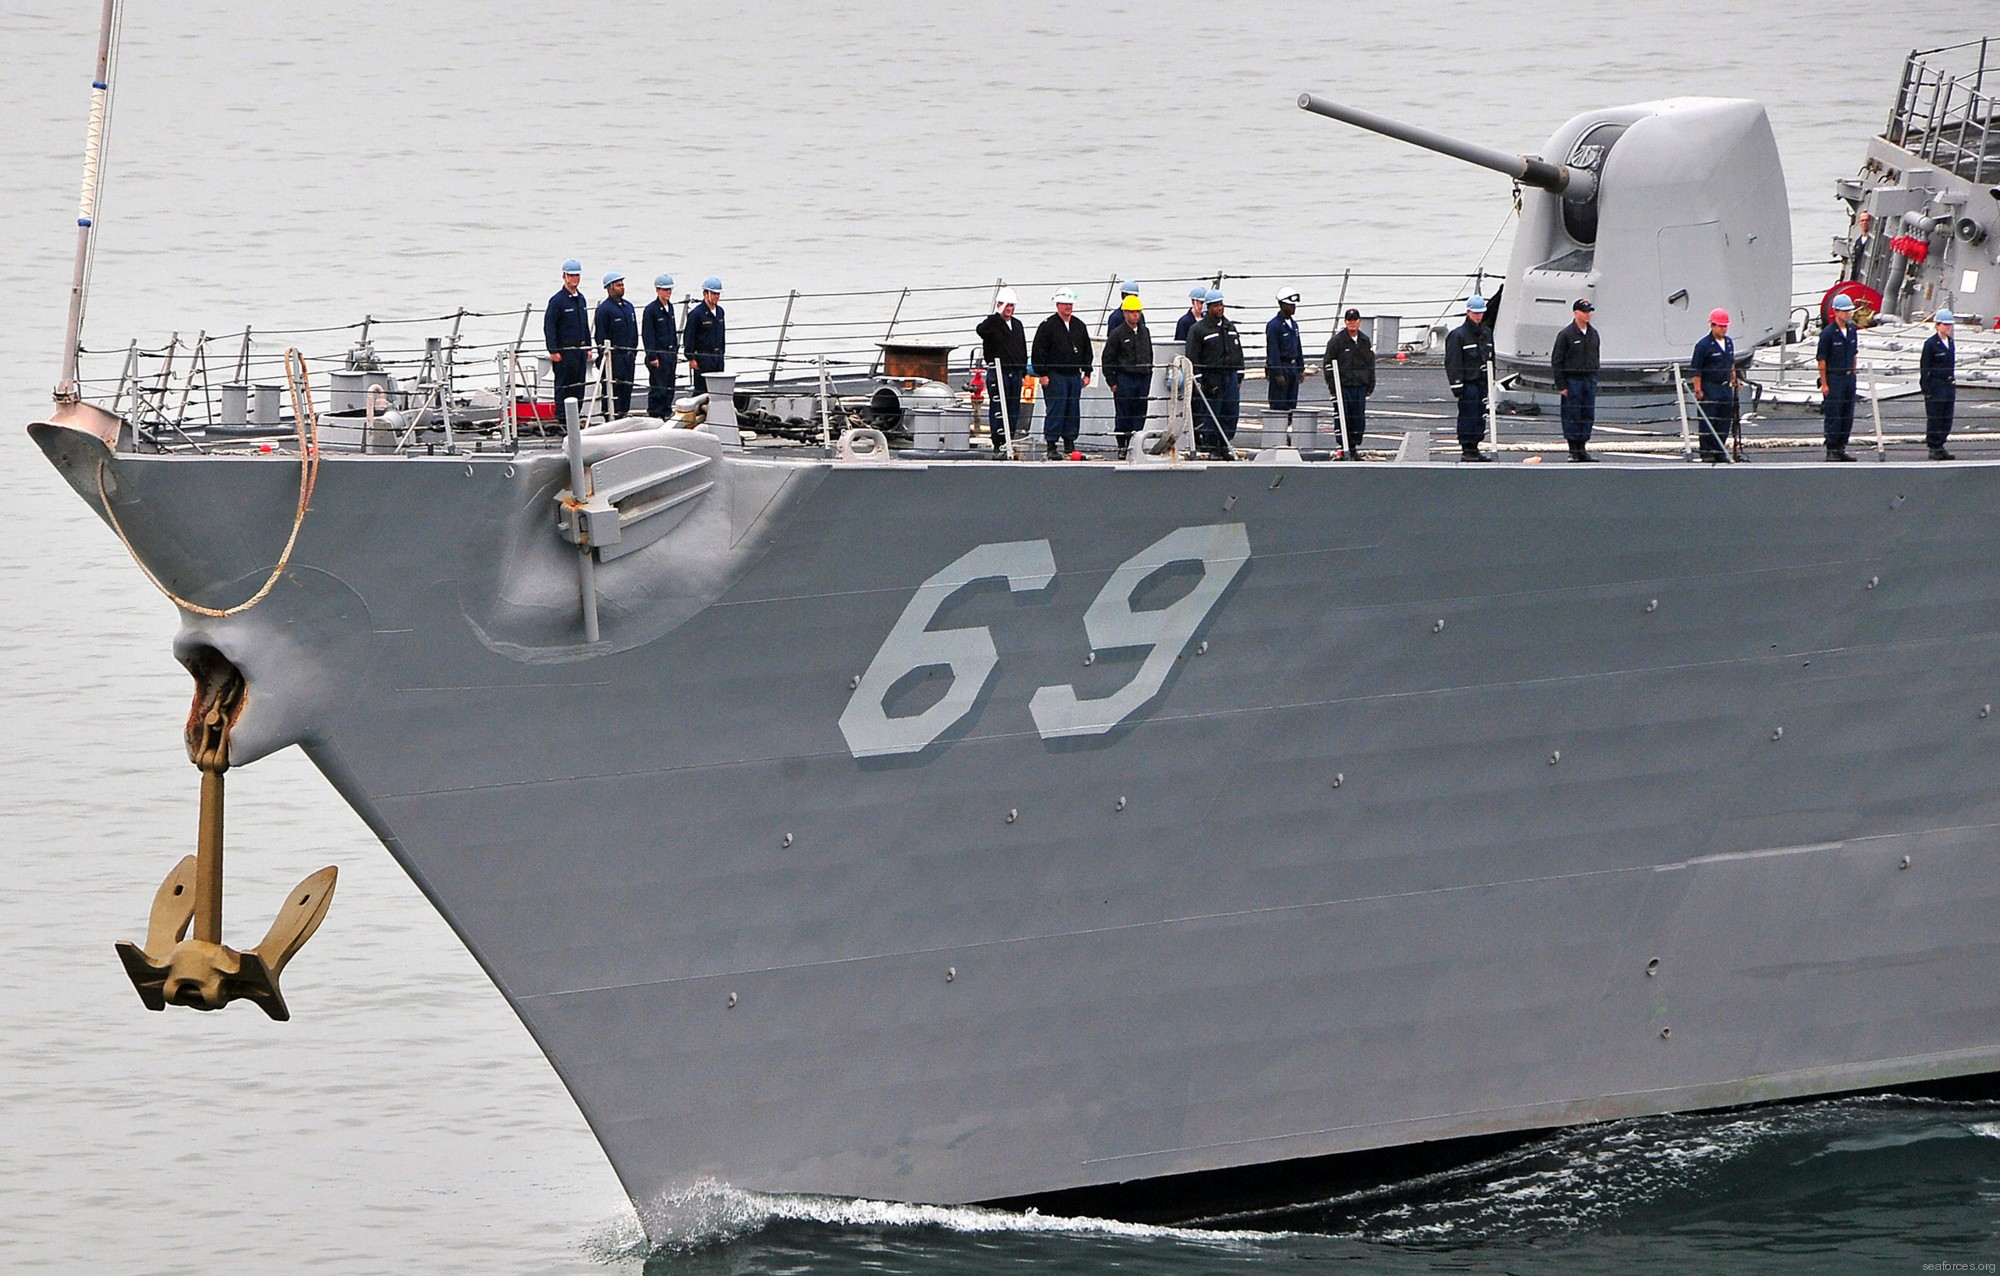 ddg-69 uss milius guided missile destroyer arleigh burke class aegis bmd 30